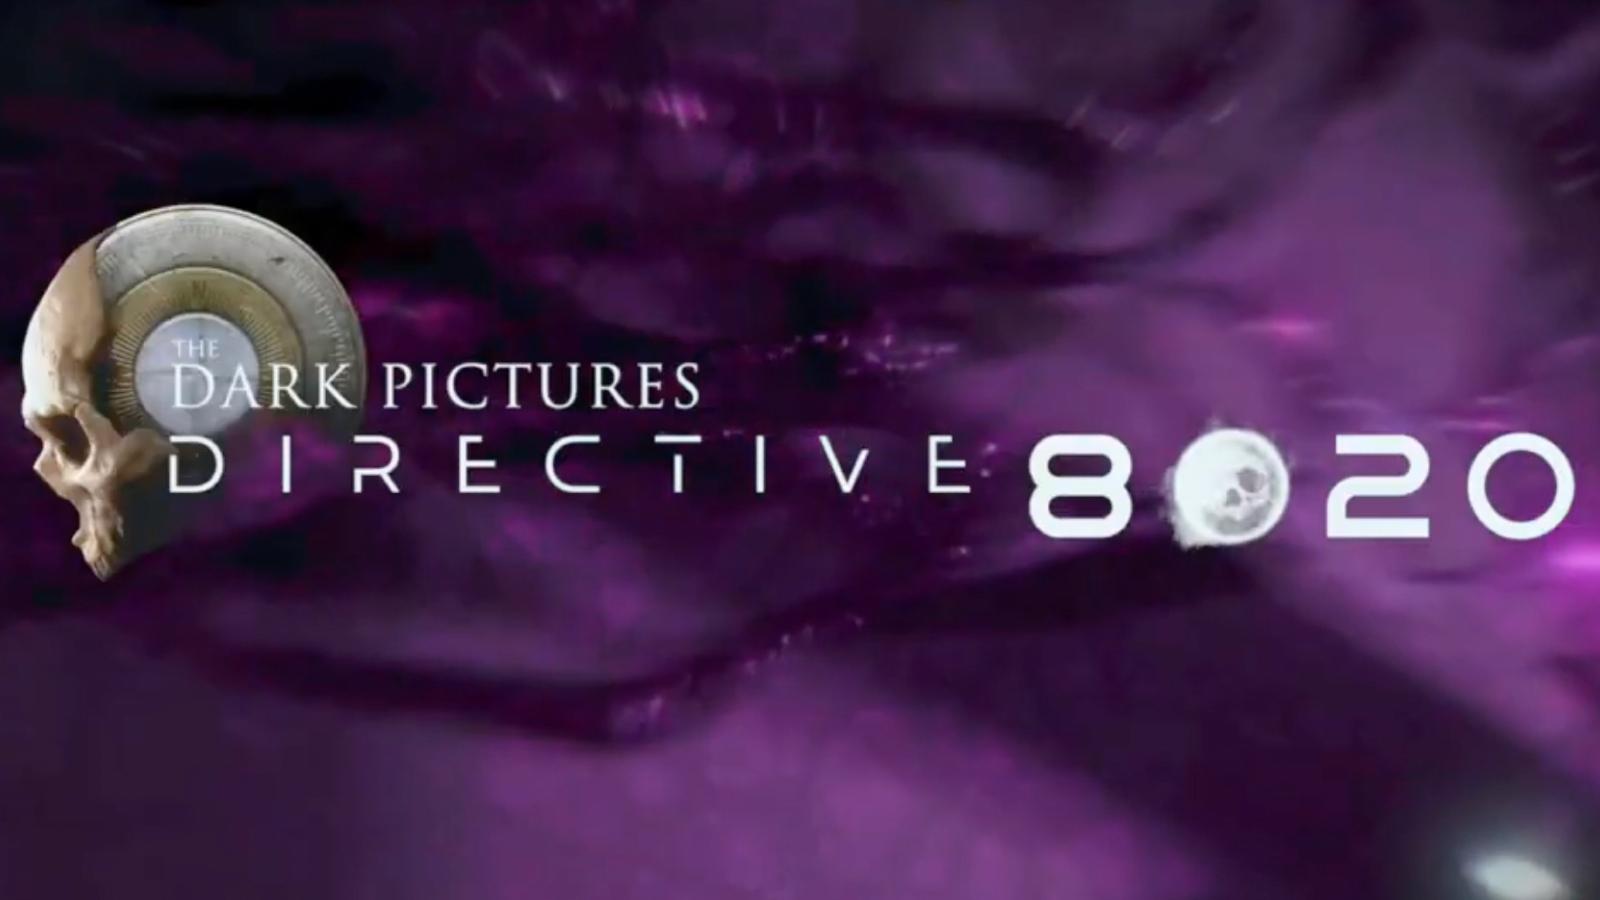 The Dark Pictures Anthology Directive 8020 release window, trailer